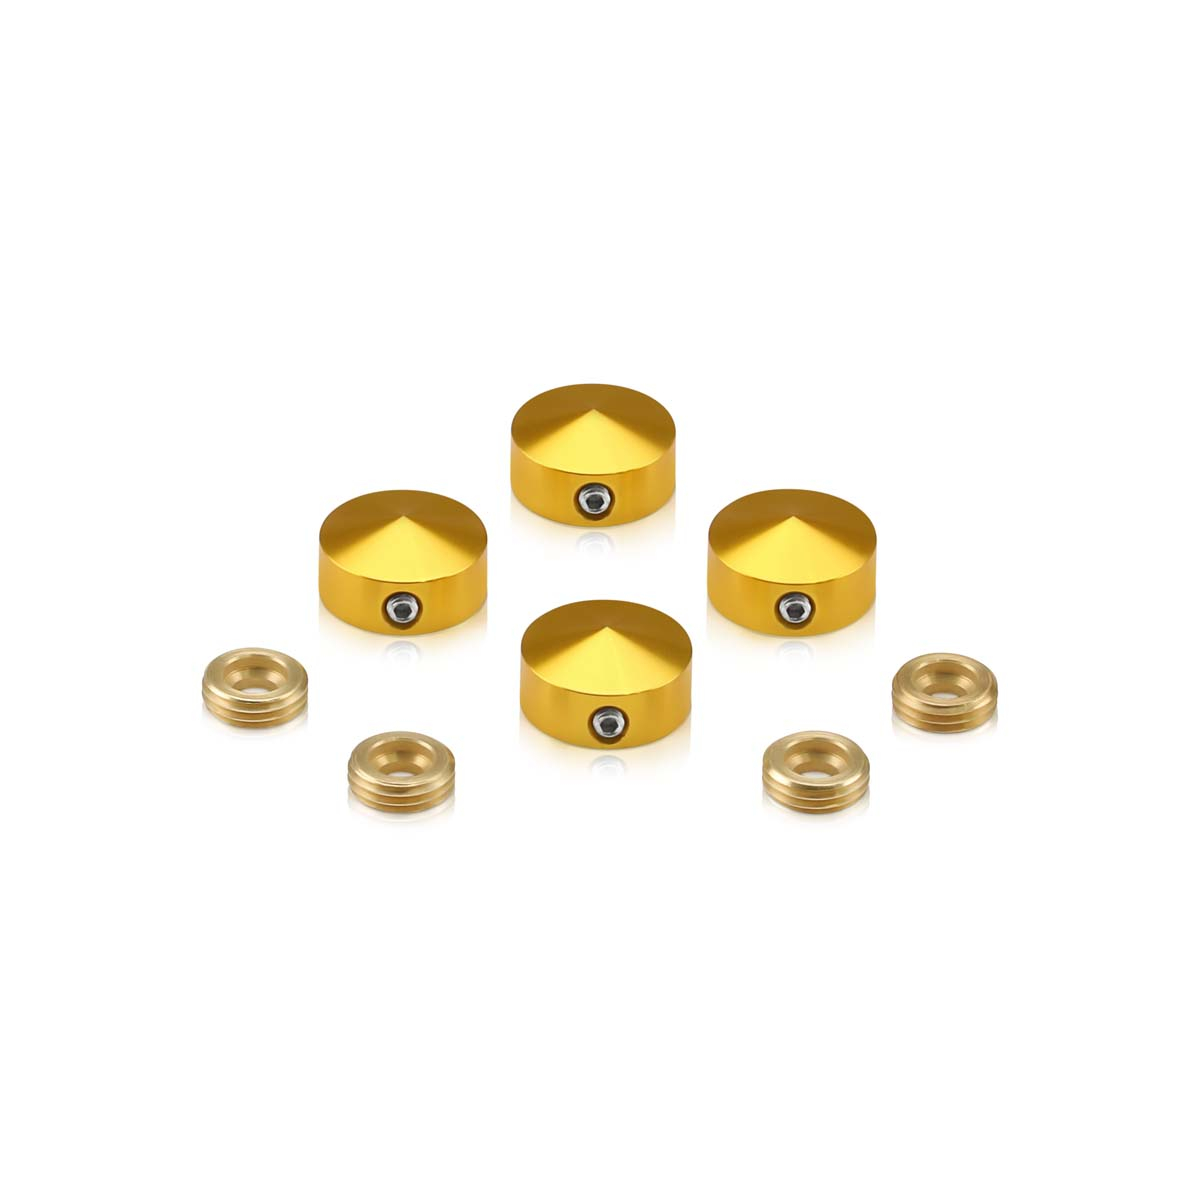 Set of 4 Conical Locking Screw Cover, Diameter: 5/8'', Aluminum Gold Anodized Finish (Indoor or Outdoor Use)